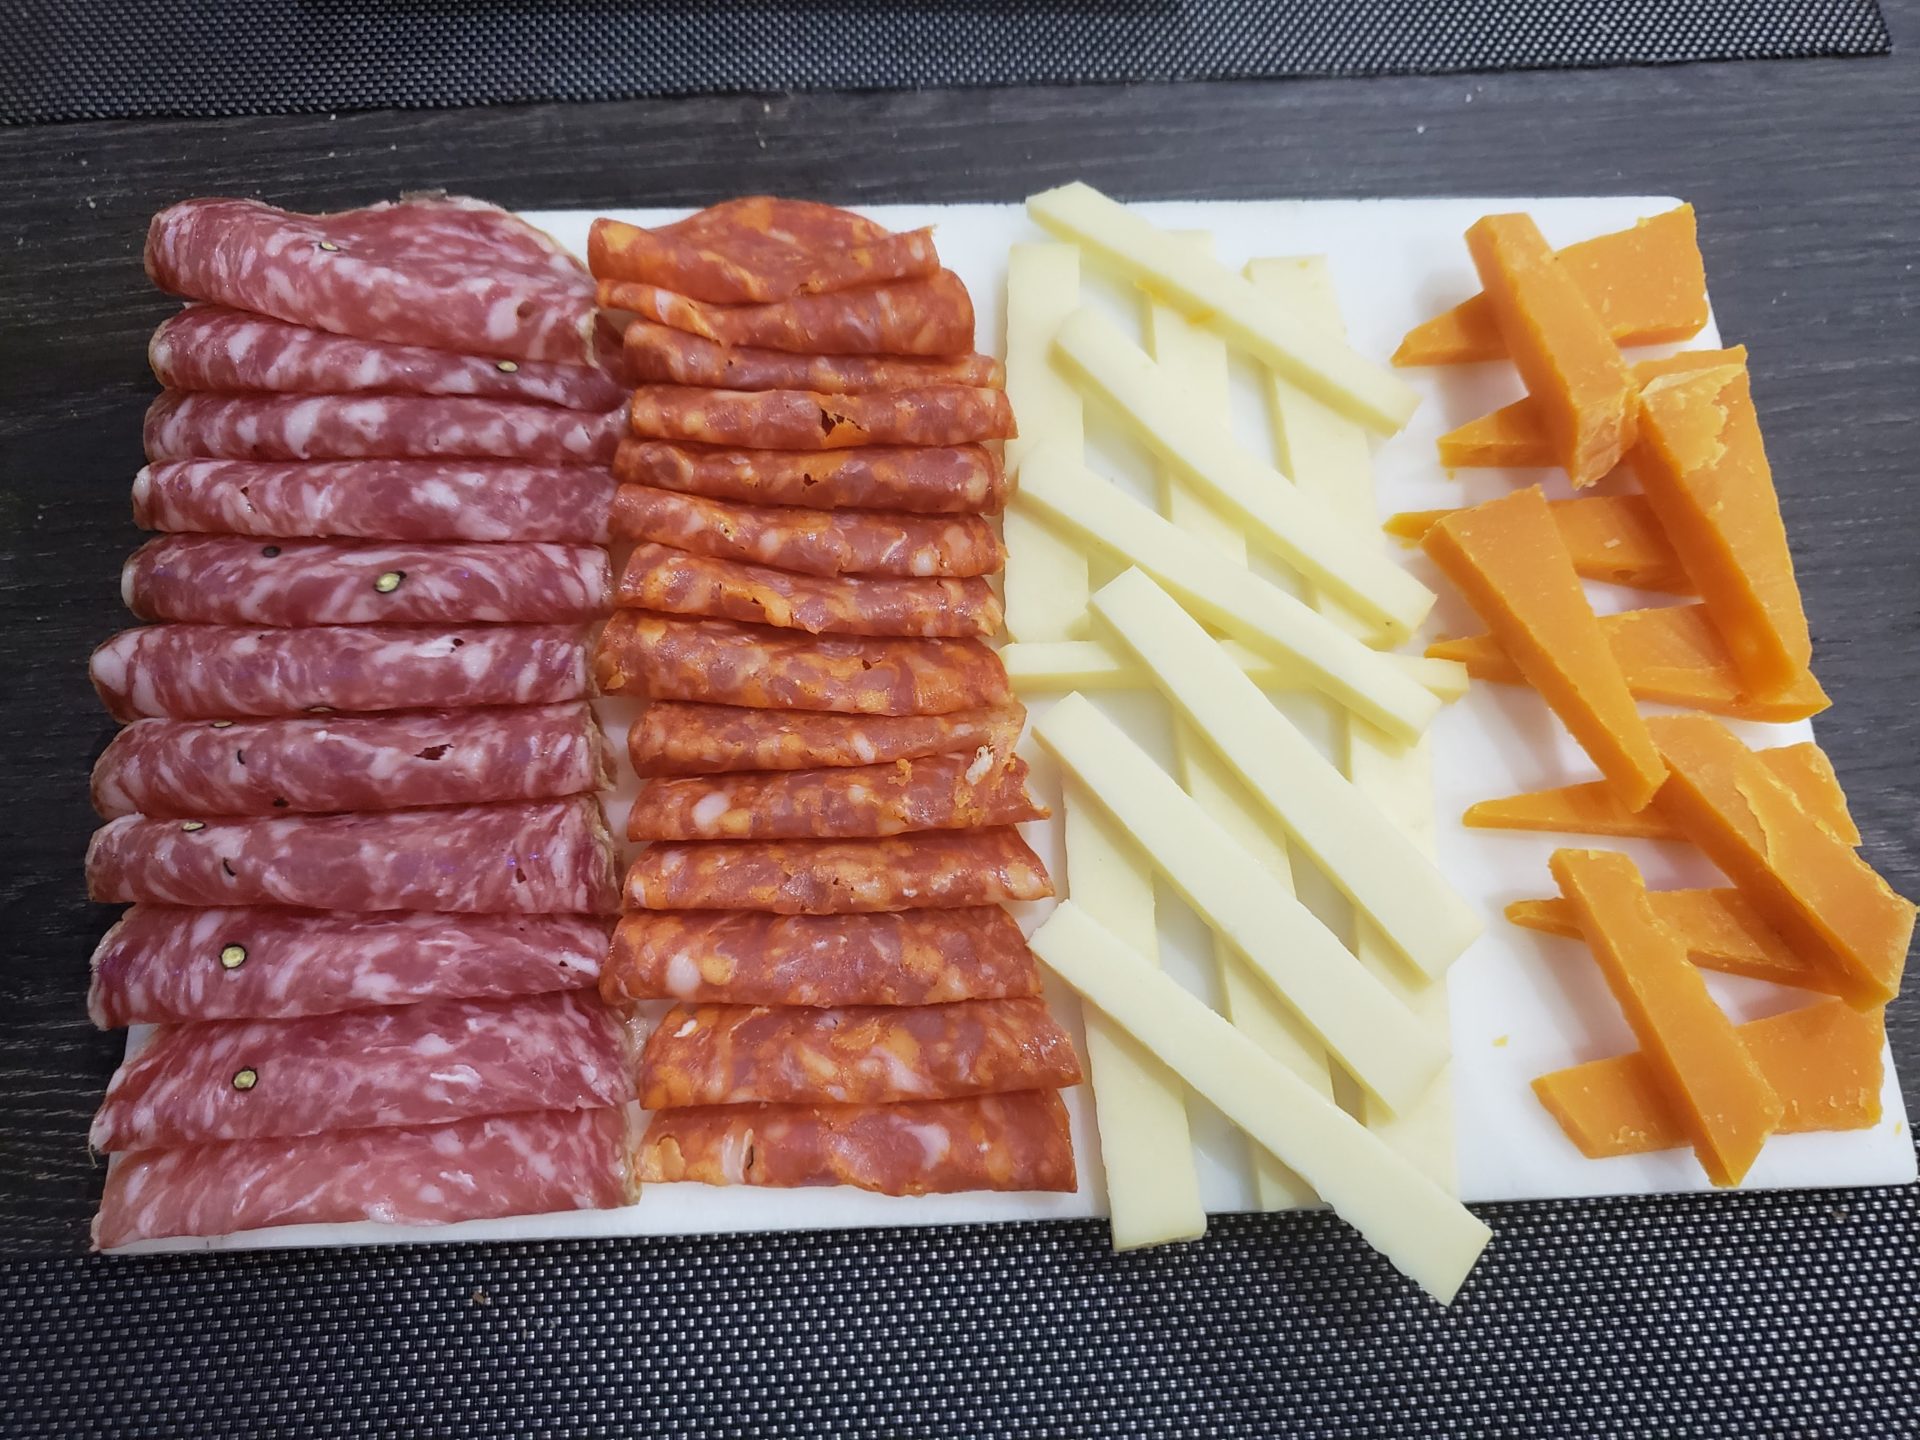 a cheese and meat on a cutting board